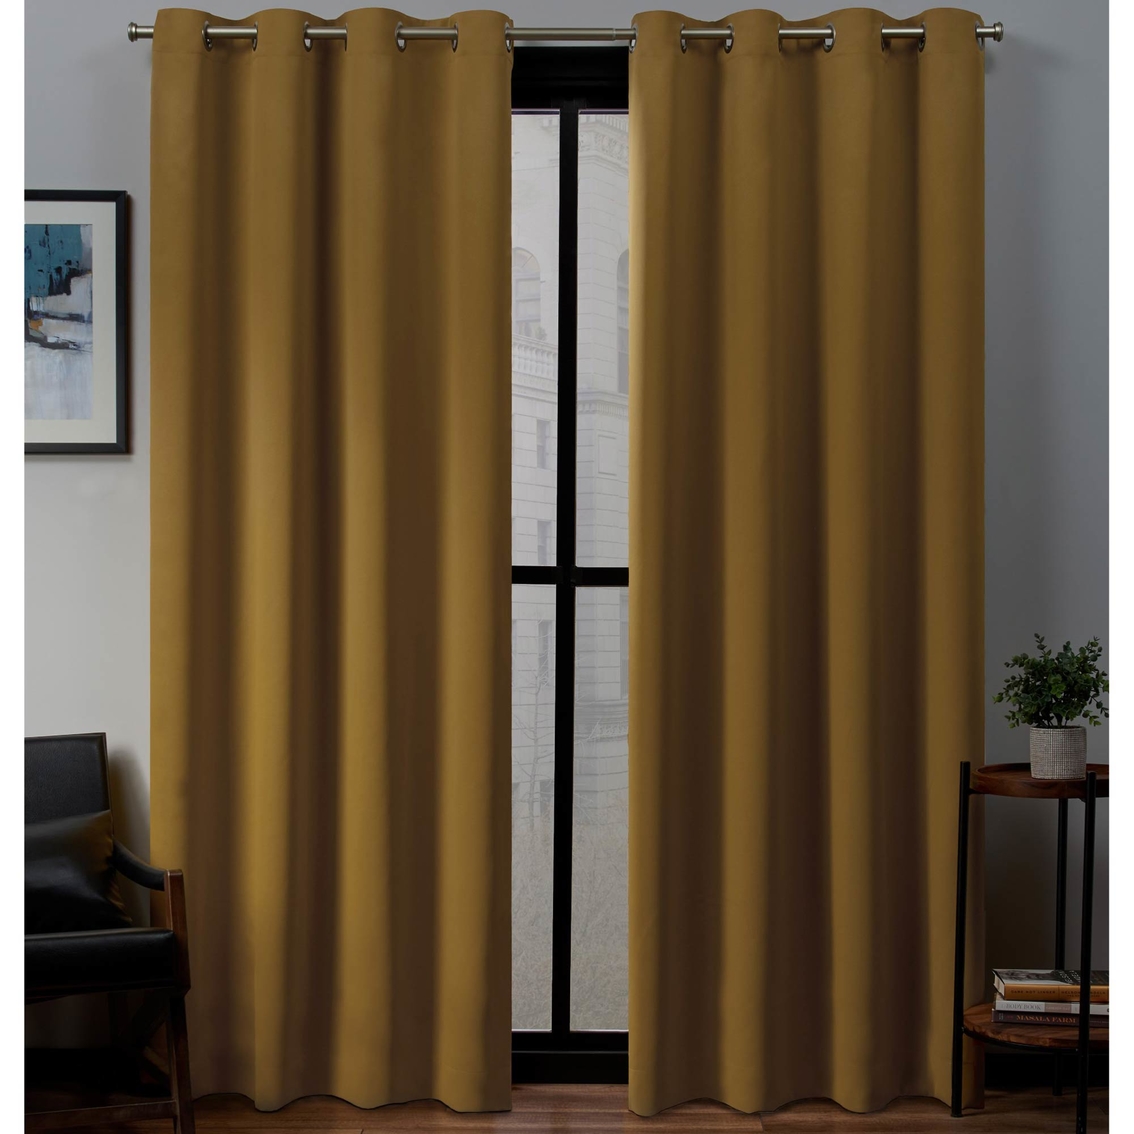 Exclusive Home Sateen Grommet Top Window Curtain Panels 52 X 84 In 2 Pk Curtains Drapes Household Shop The Exchange